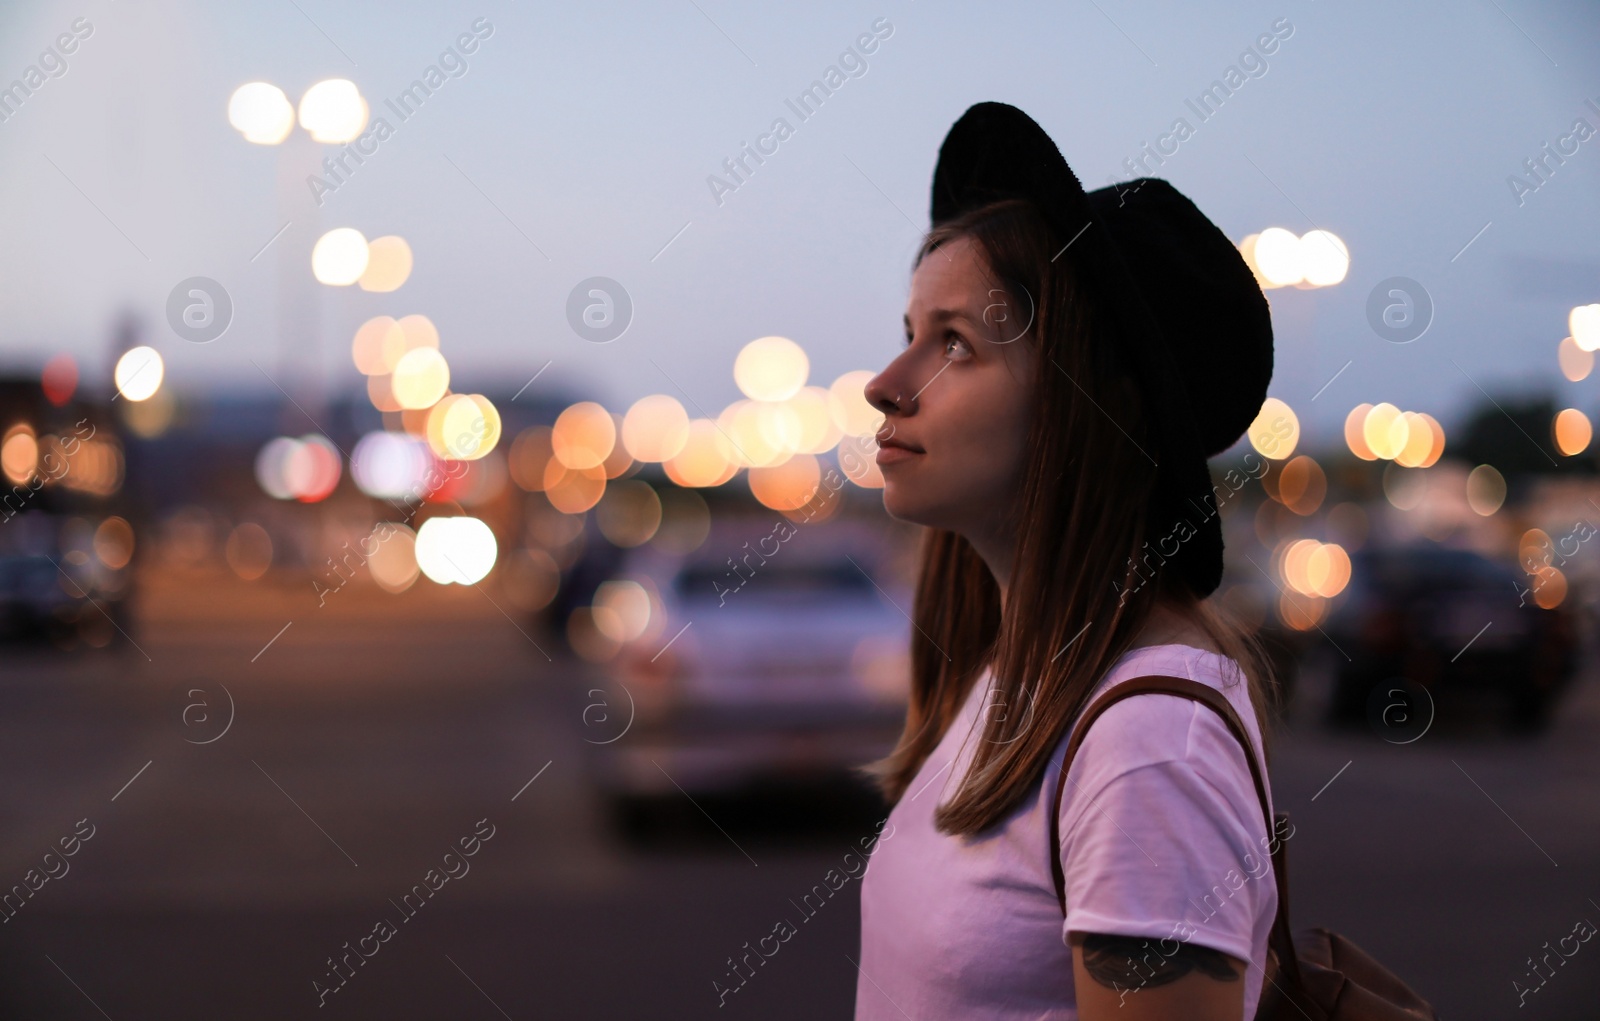 Photo of Young woman in stylish outfit on city street